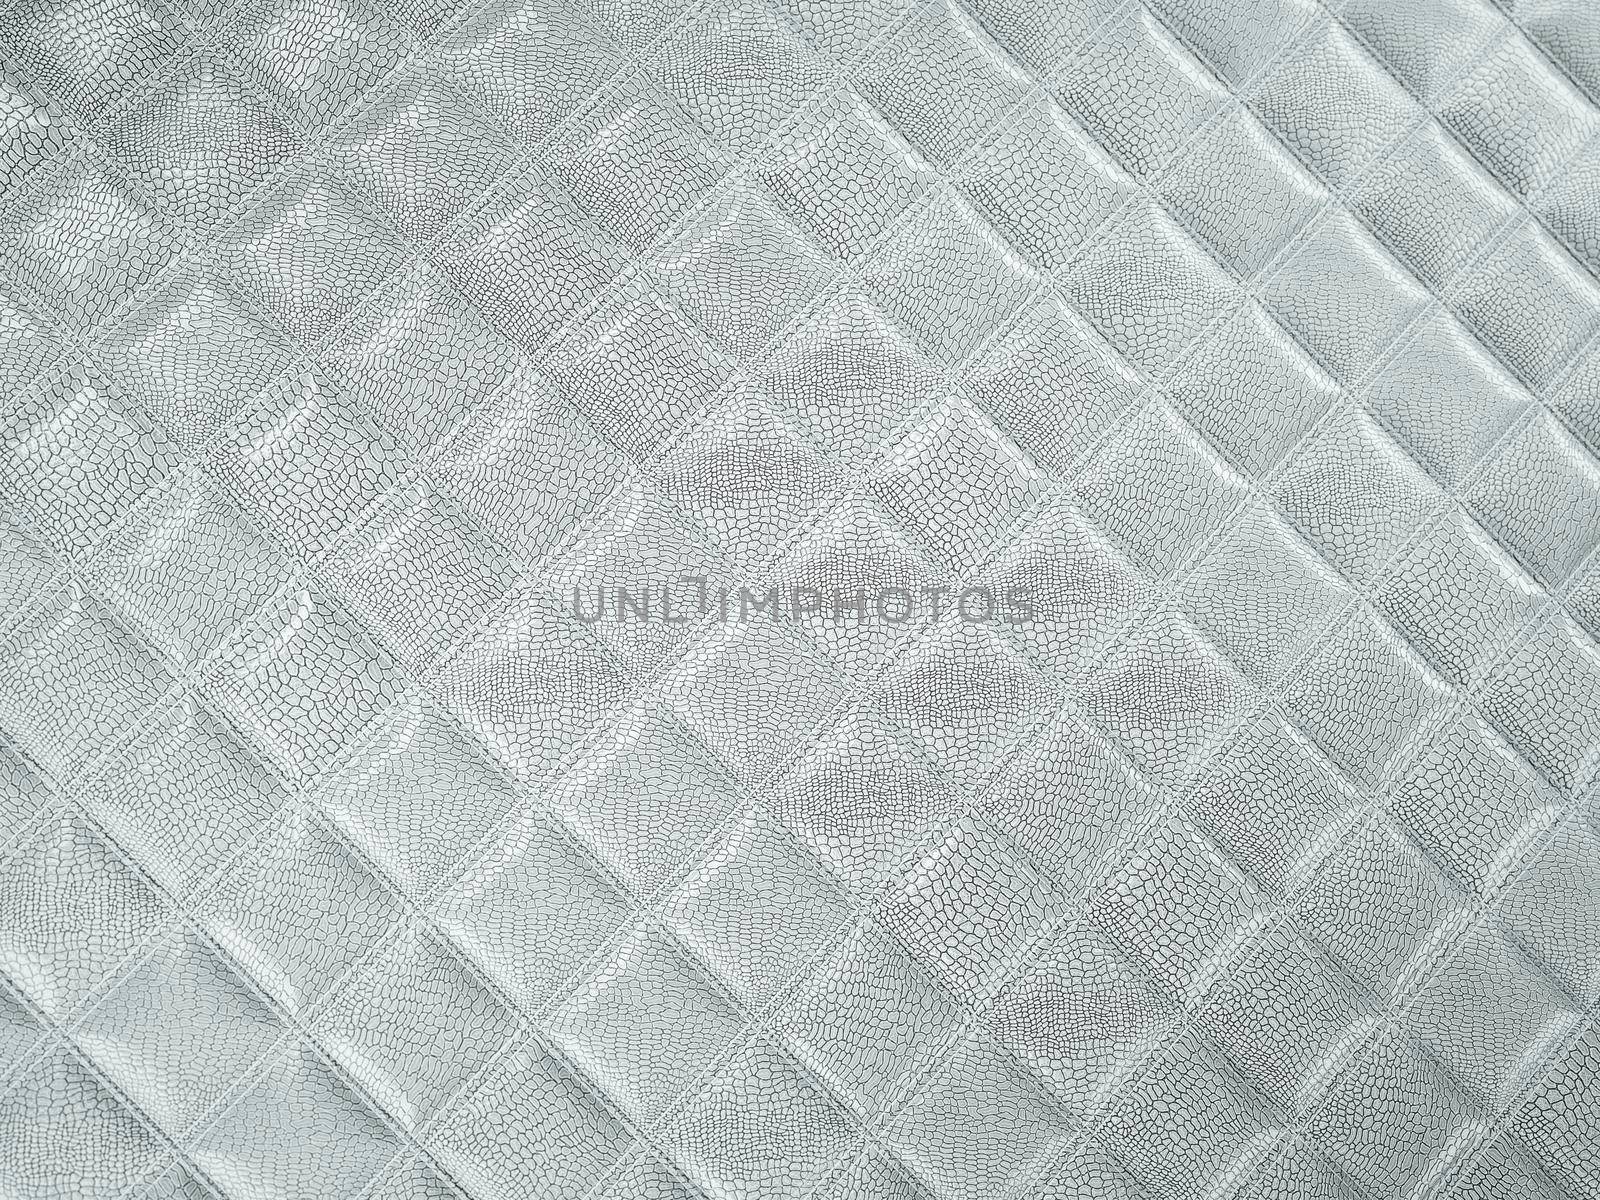 Alligator or snake Leather. Square stitched texture or background with bumps. 3d render, 3d illustration